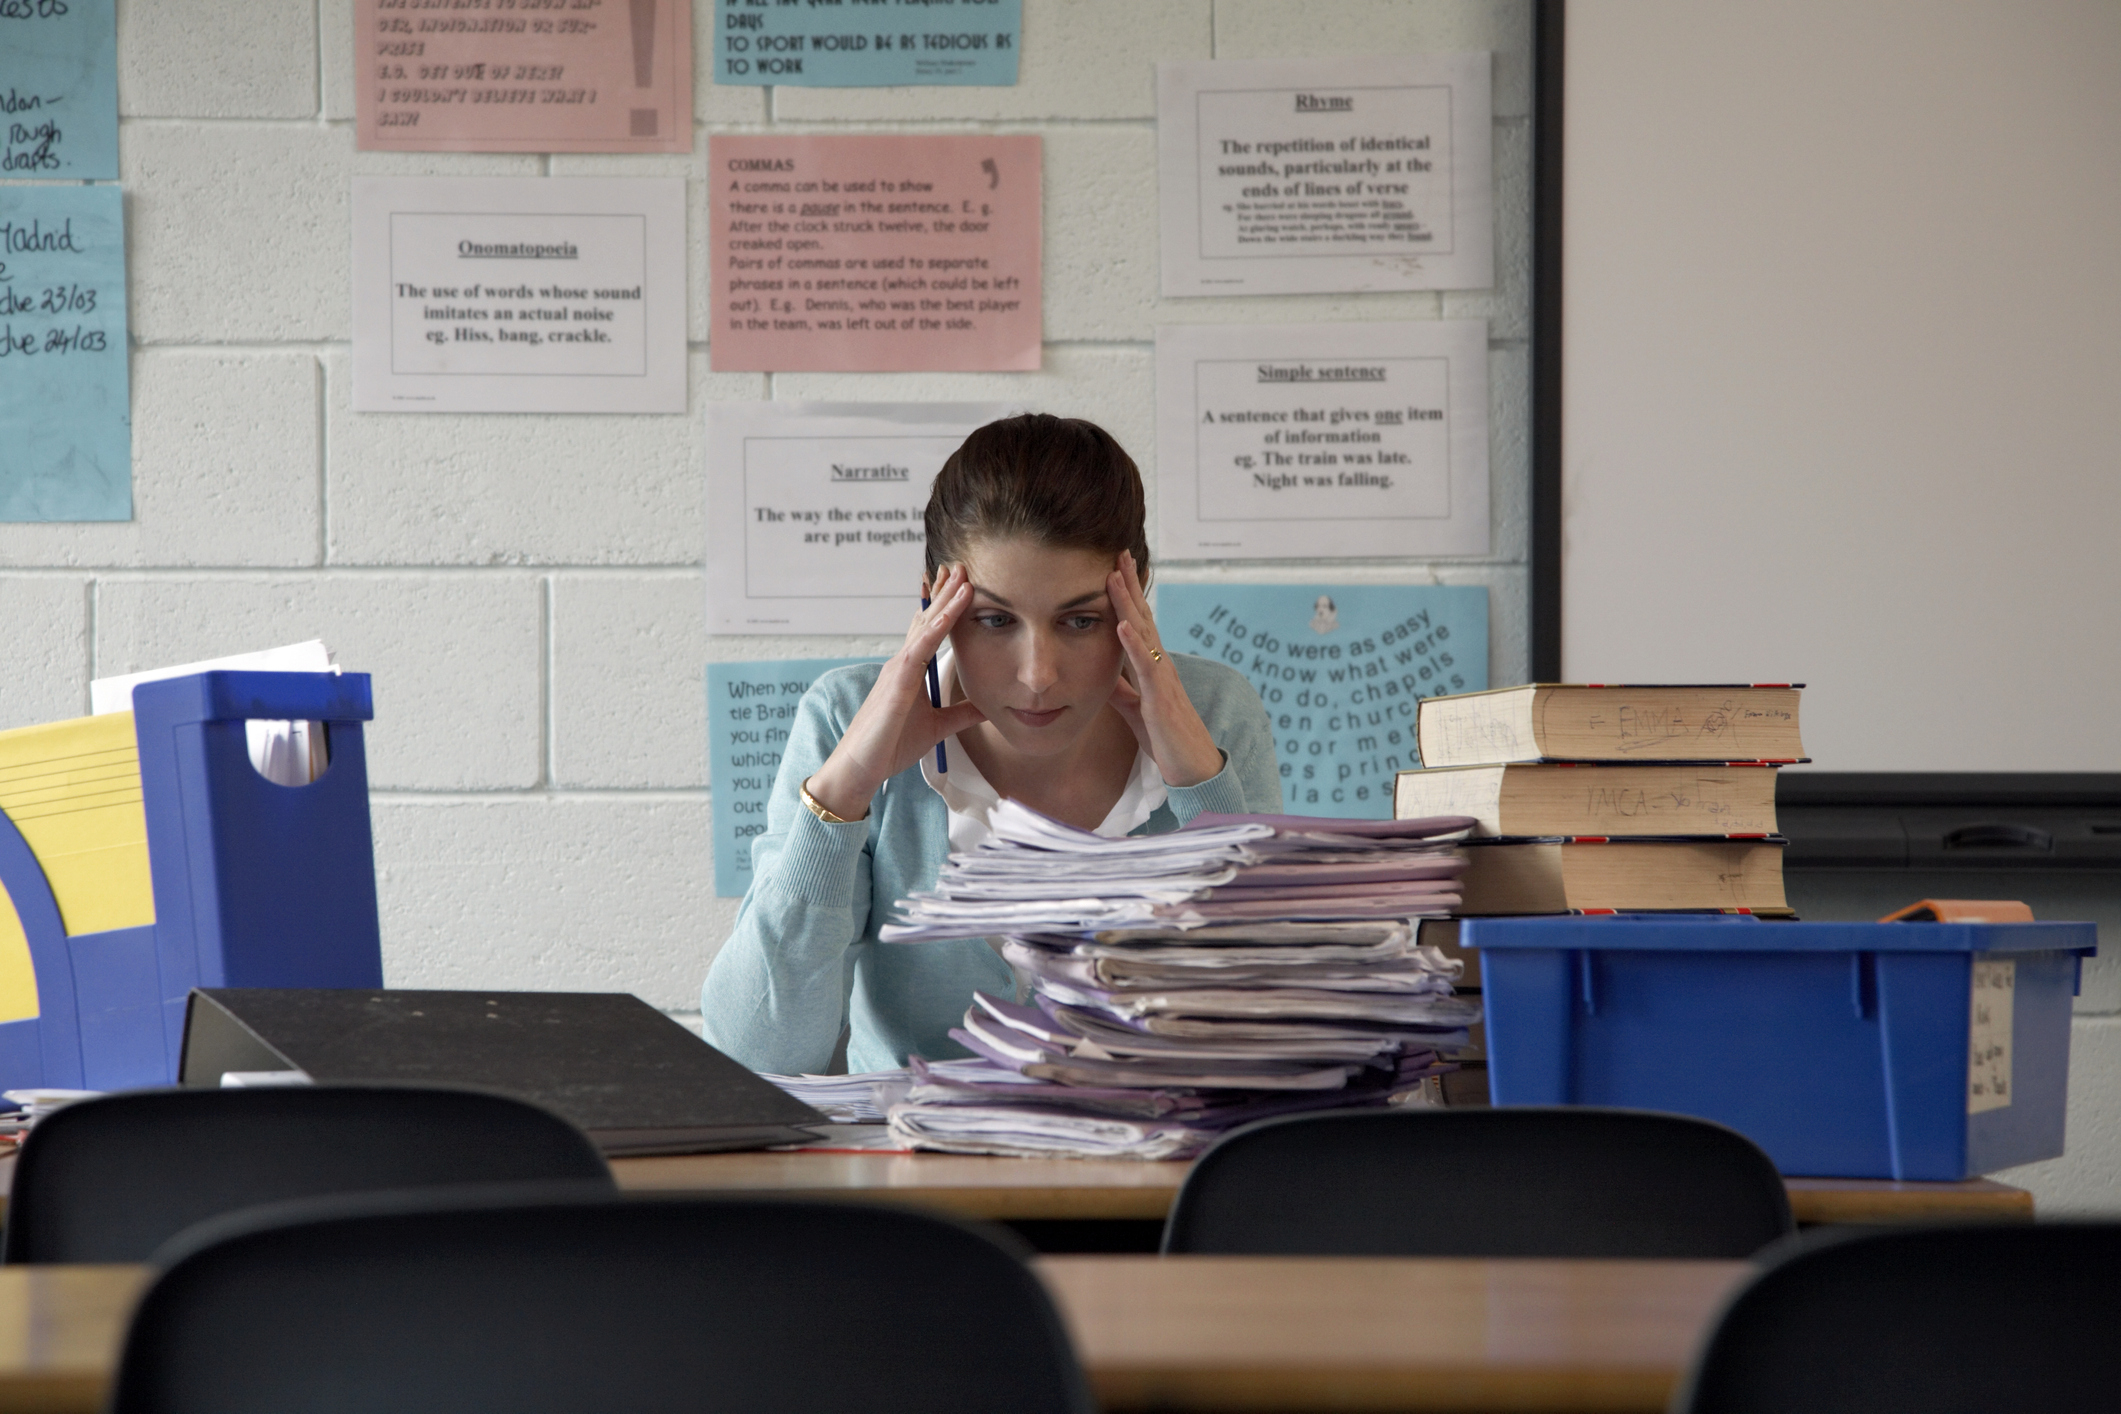 Teacher sitting at a desk with a stack of papers, appearing stressed or thoughtful